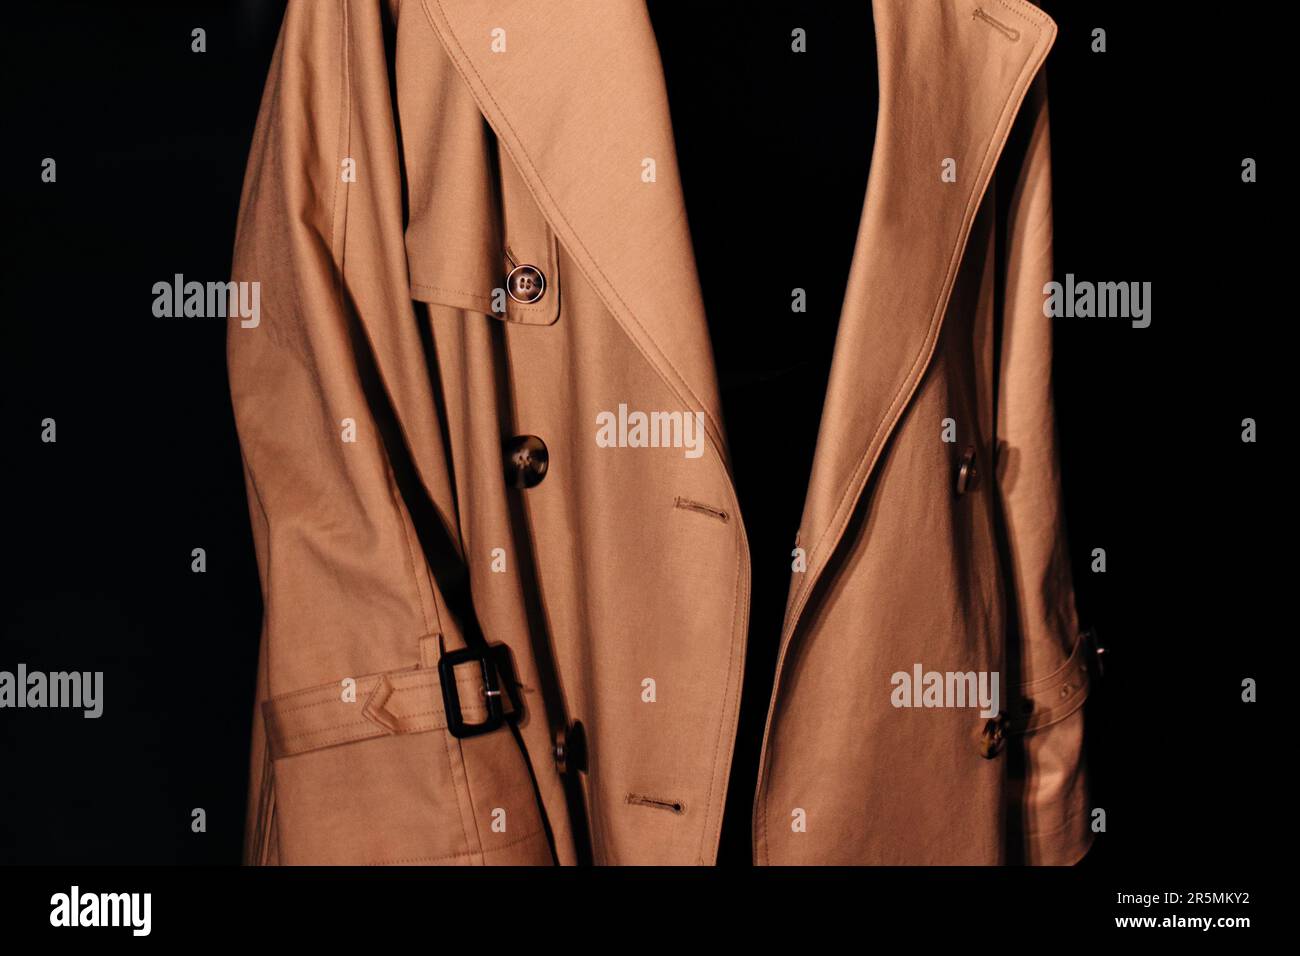 Details of autumn brown classy coat. Unisex street style fashion cloth concept. Black background Stock Photo